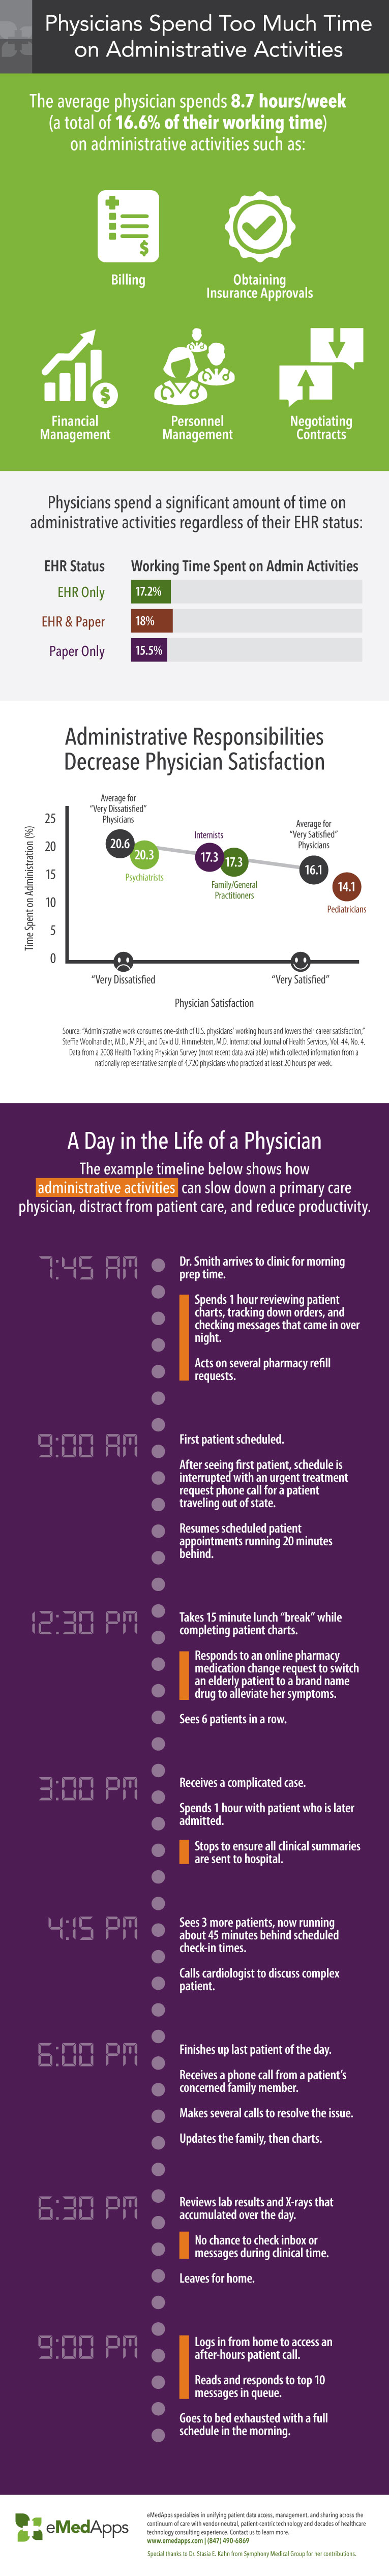 Physicians spend an average of 8.7 hours each week on administrative activities. Learn how to reduce time wasters and keep the focus on delivering care.